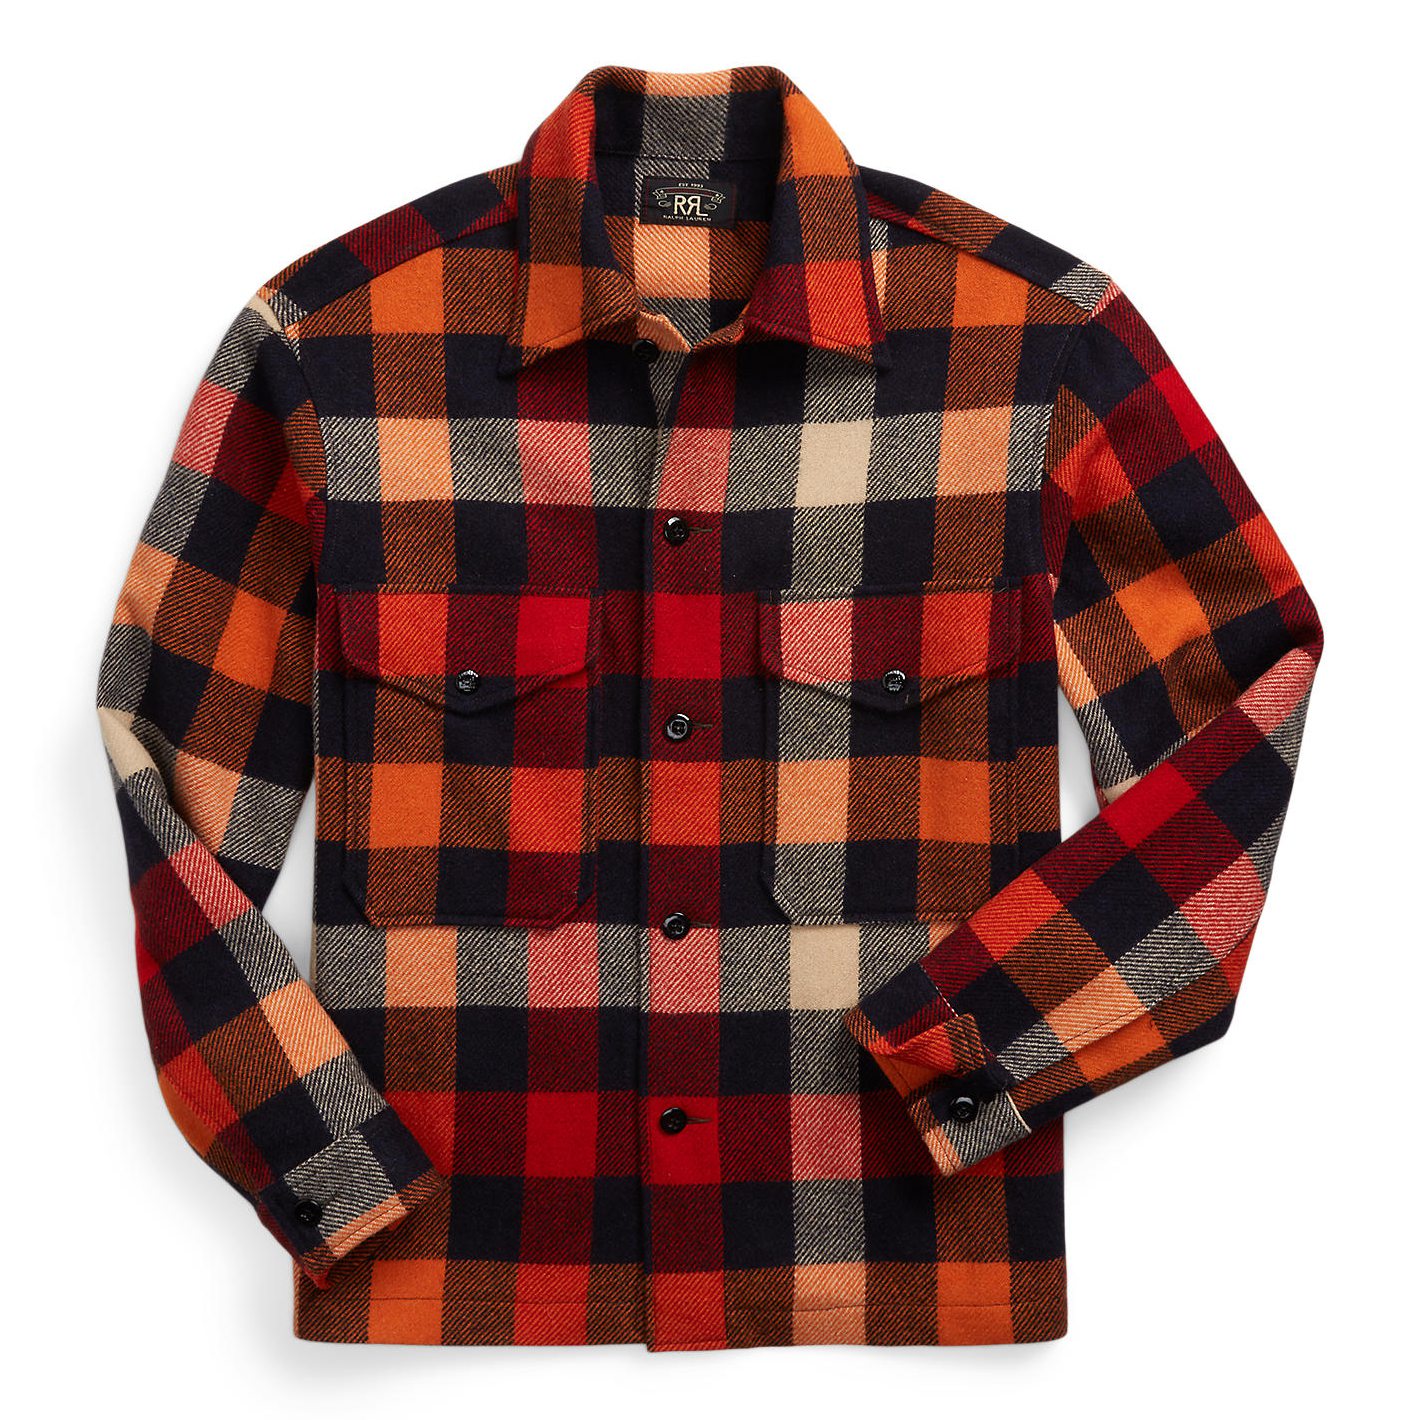 Abercrombie & Fitch Elevated Wool-Blend Shirt Jacket | MainPlace Mall